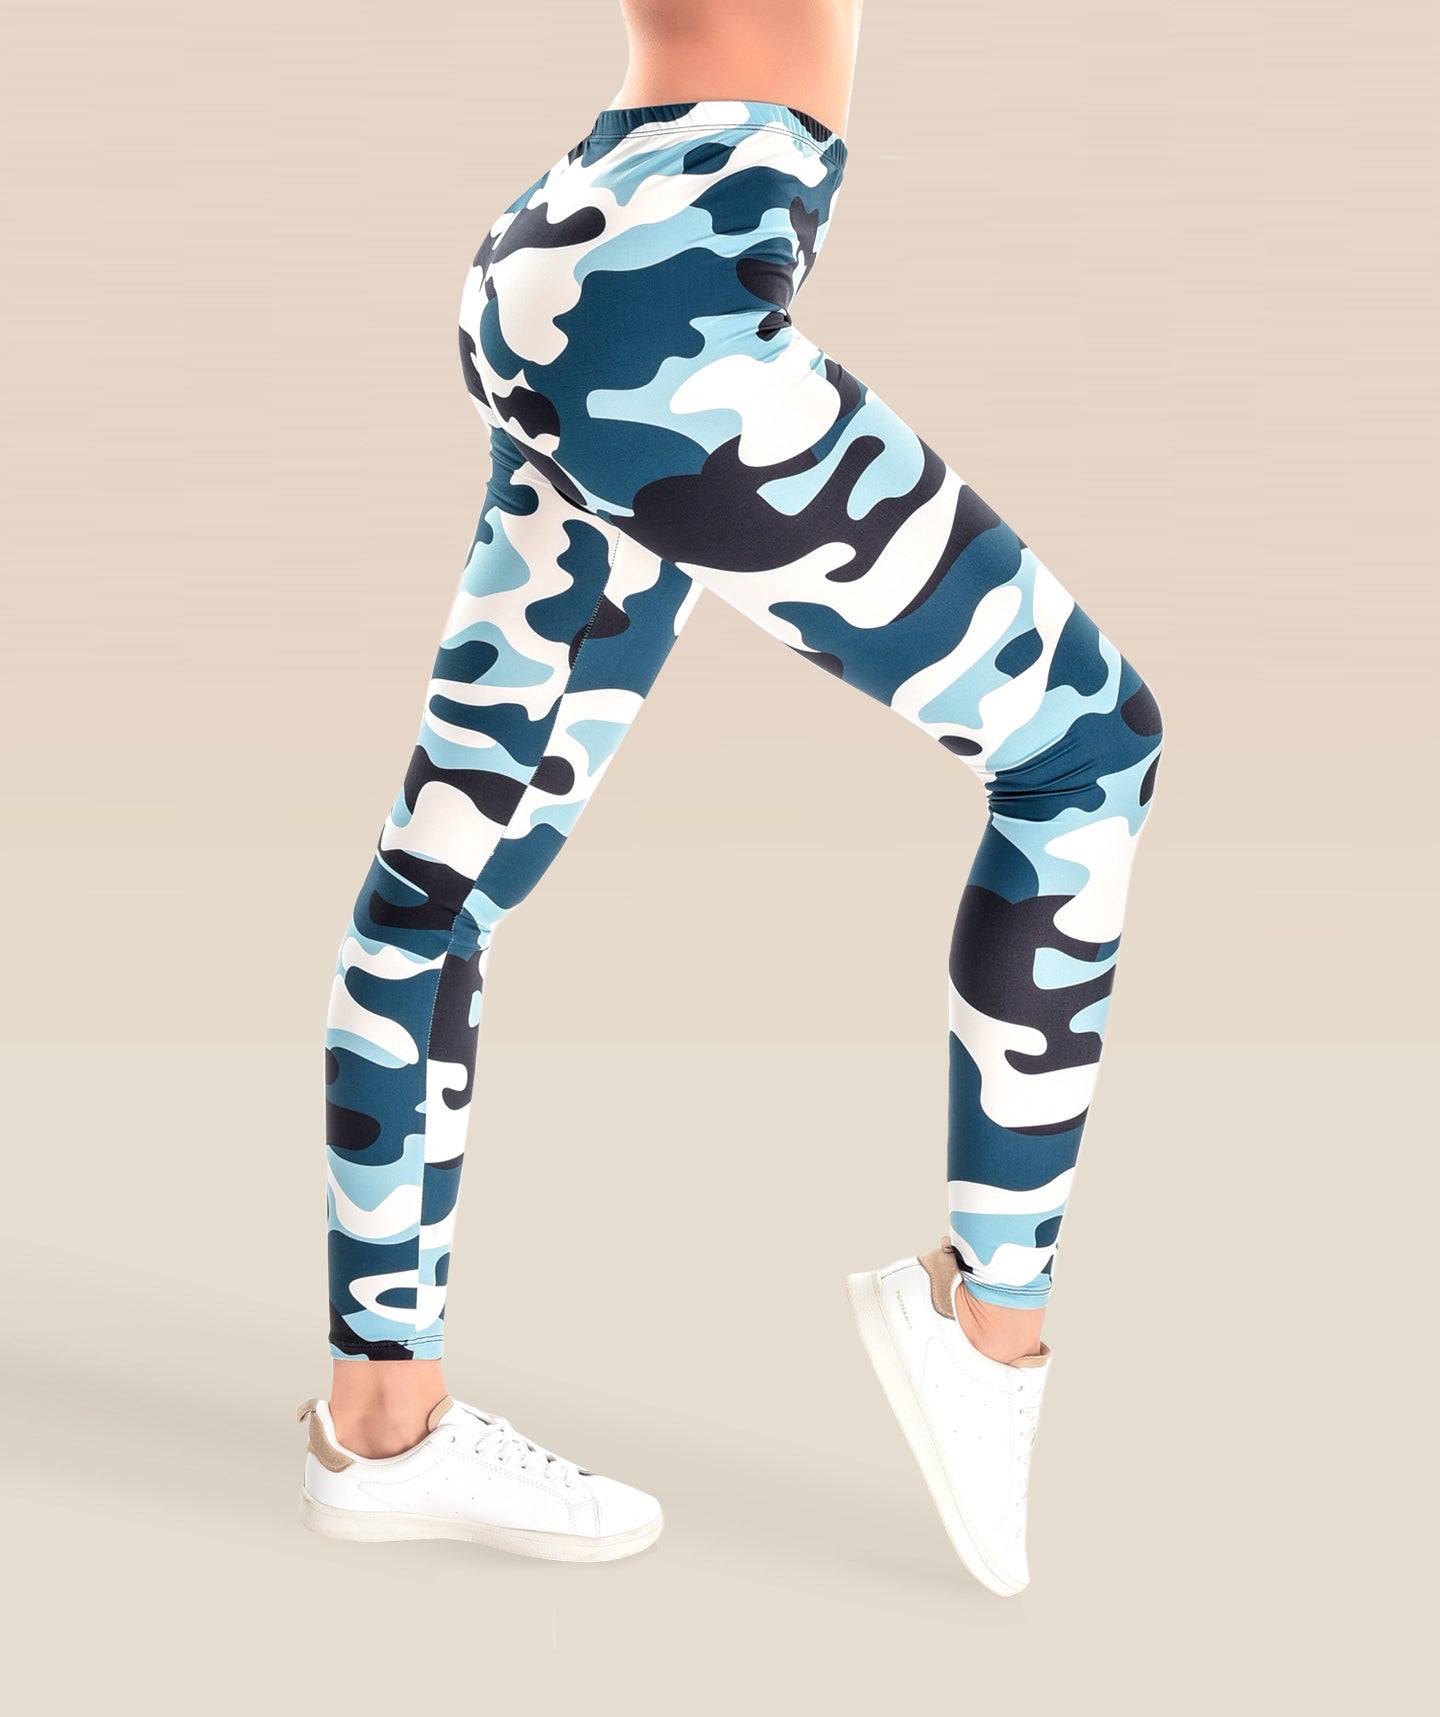 Print Blue Camo in Navy Camouflage – Leggings